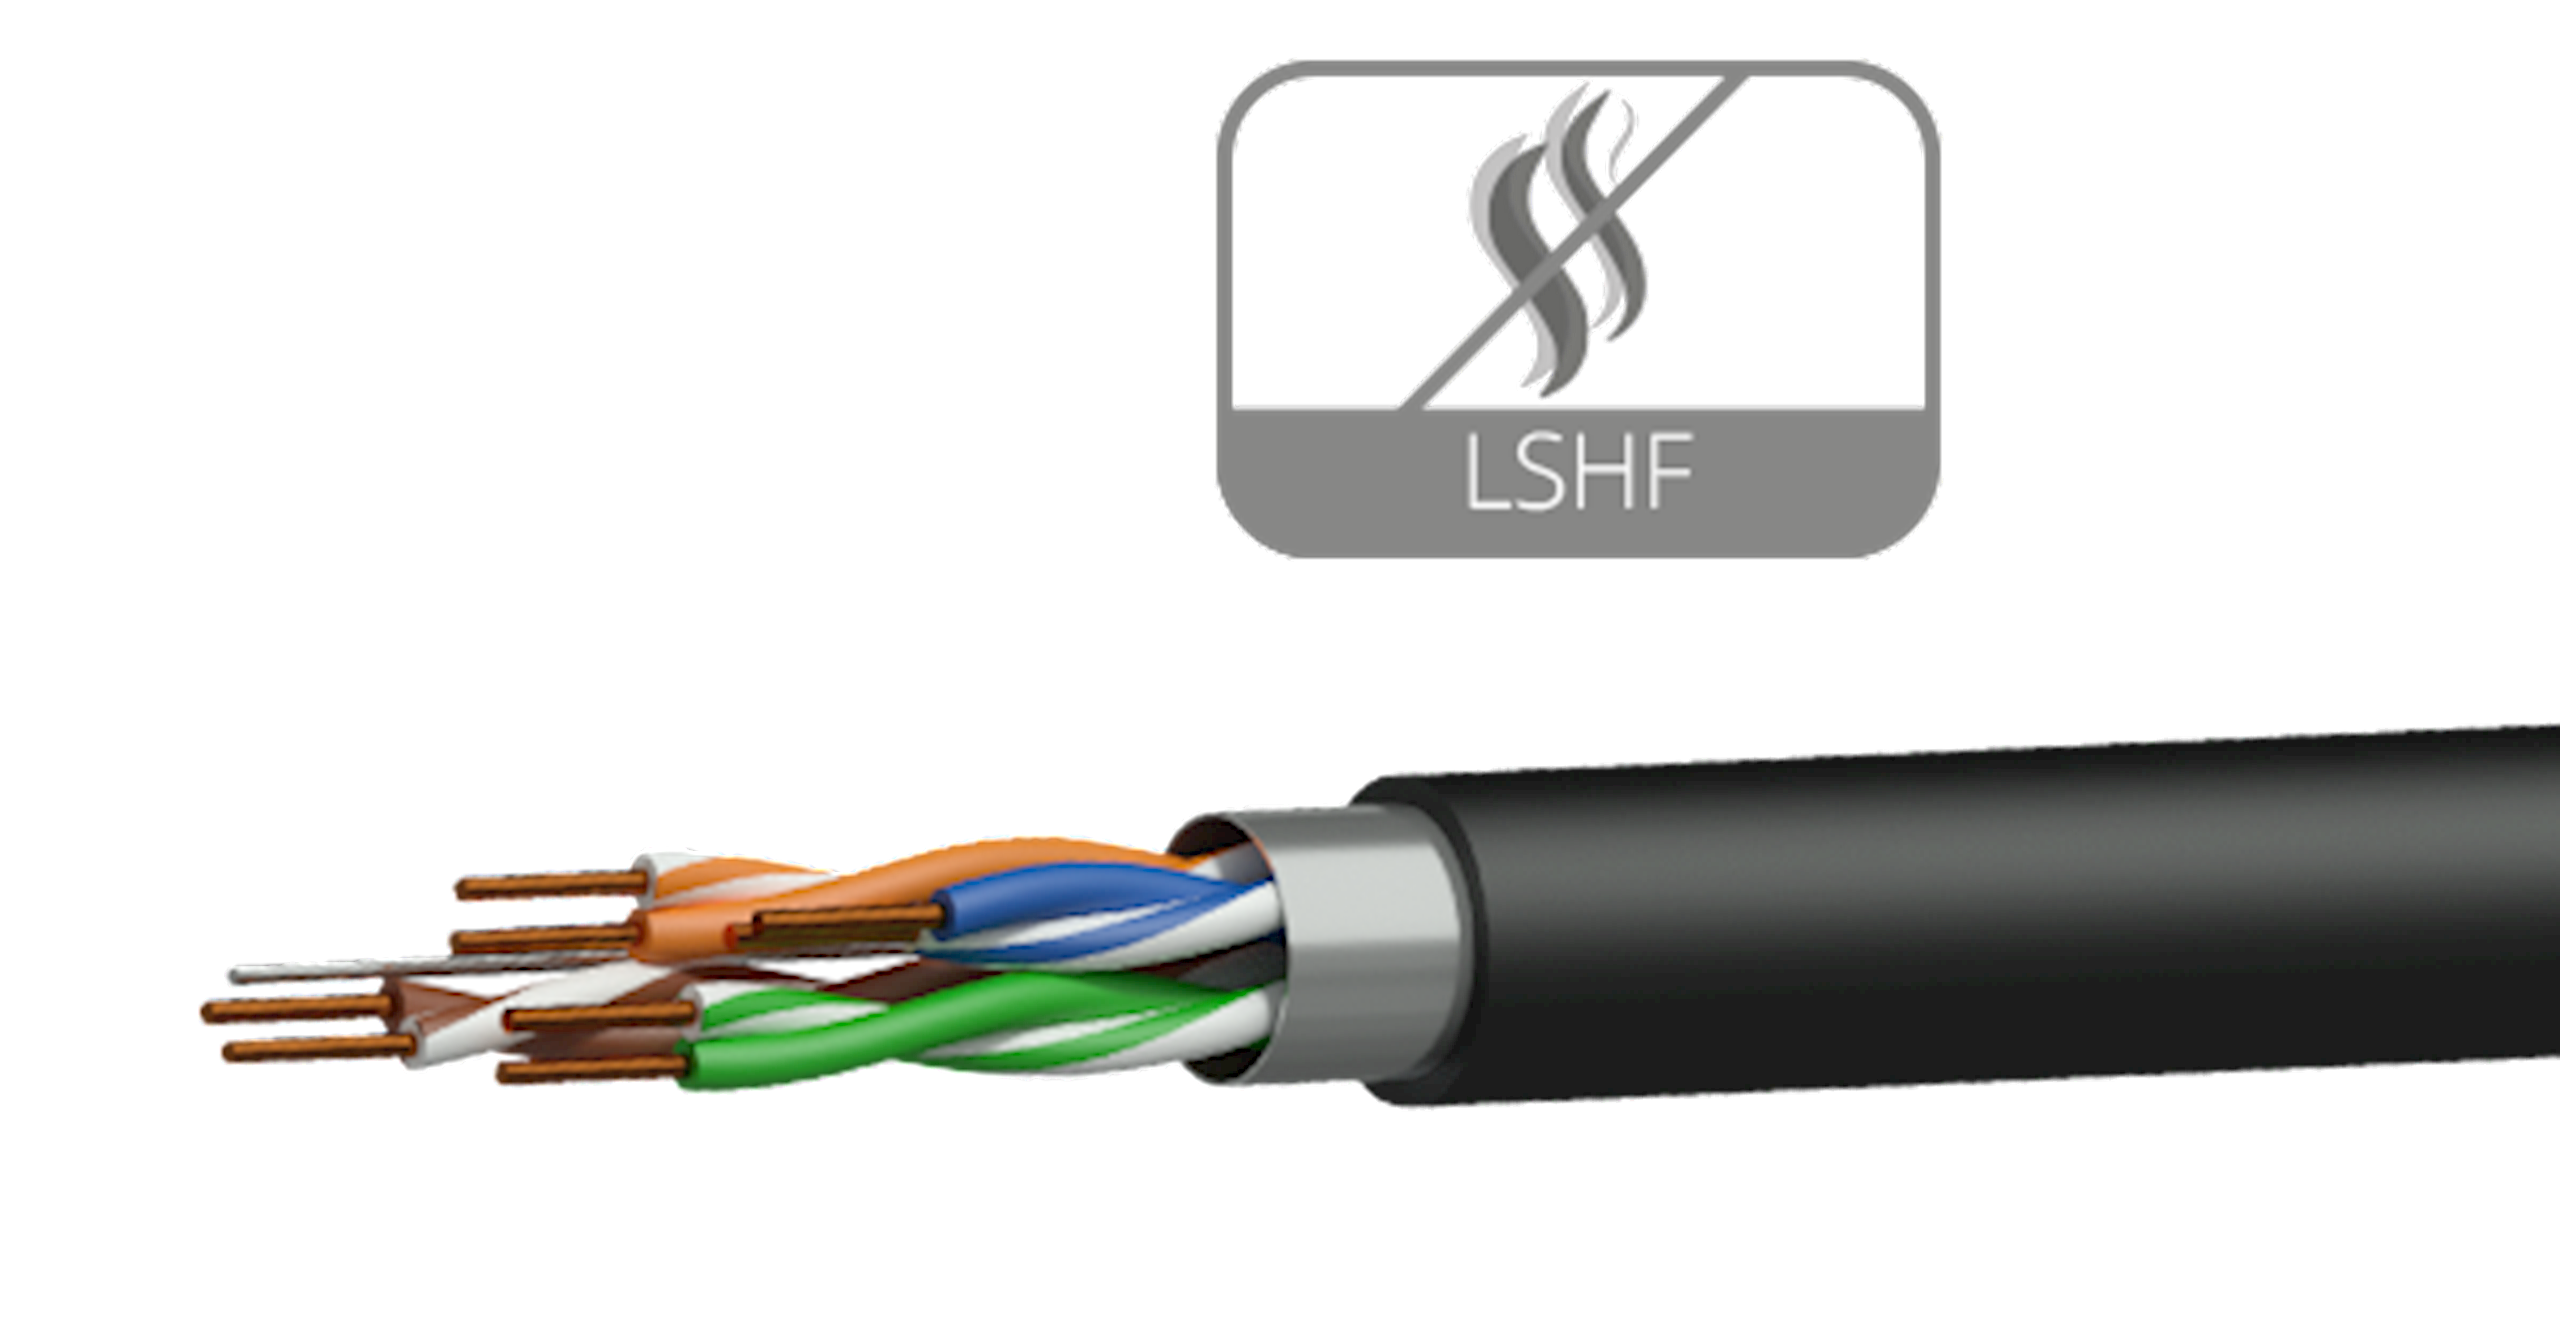 electrical clipart ethernet cable